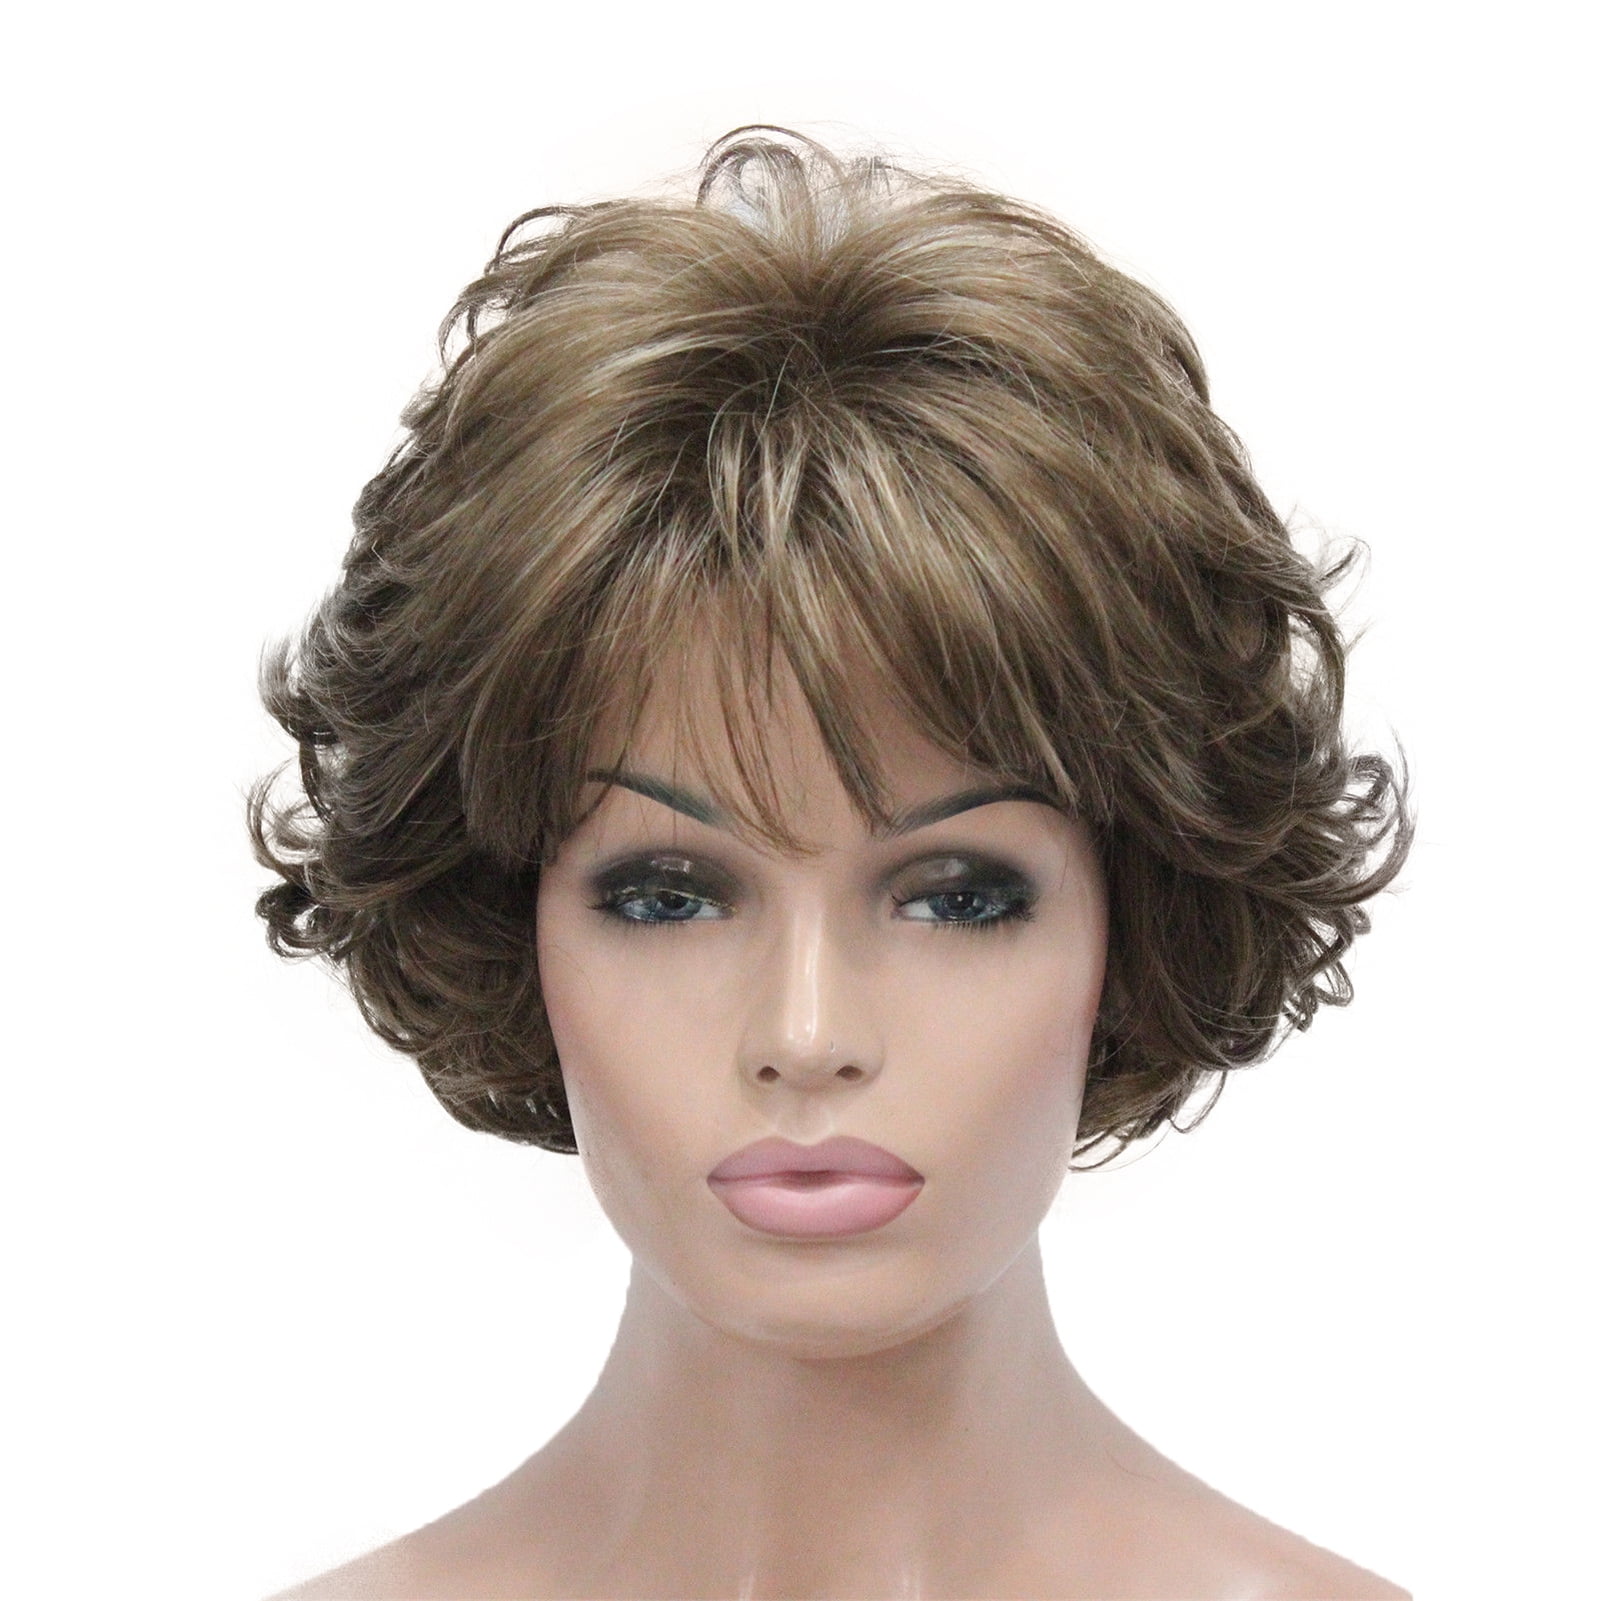 Lydell 8 Short Curly Women Wigs Soft Shaggy Layered Classic Cap Full Synthetic Wig Light